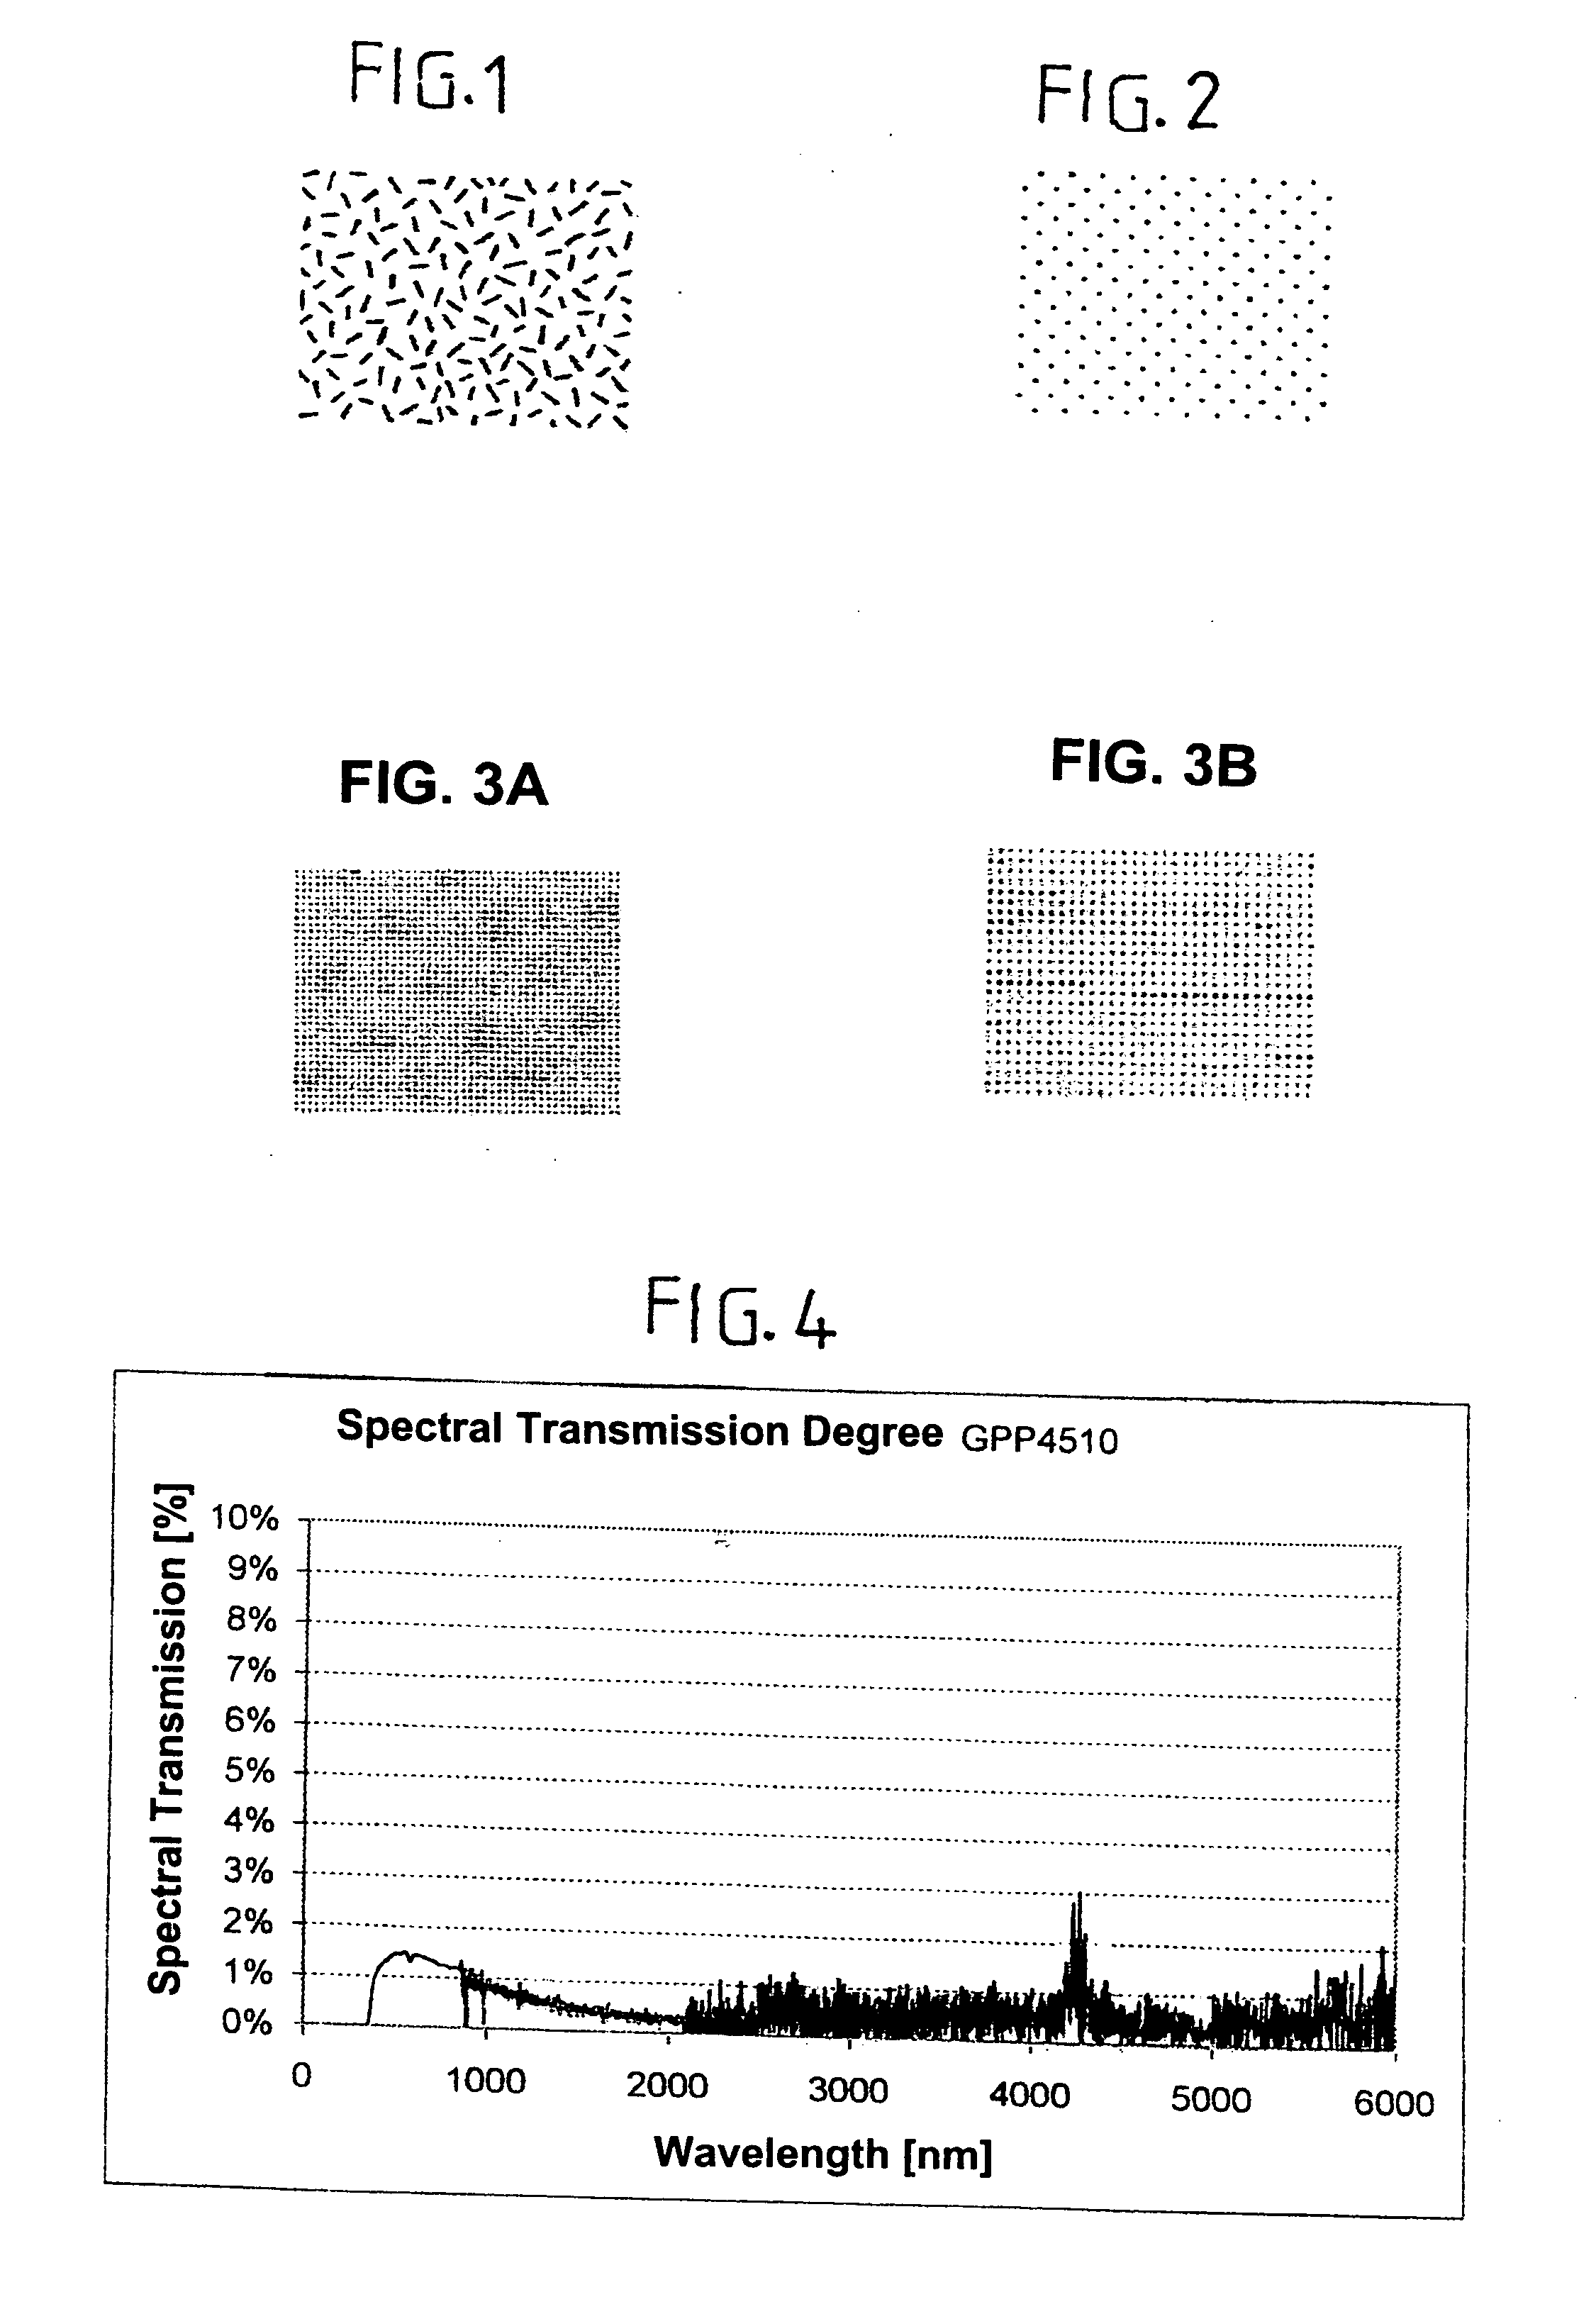 Glass ceramic plate providing a cooking surface for a cooking apparatus and having a coating on an underside thereof and coating process for making same